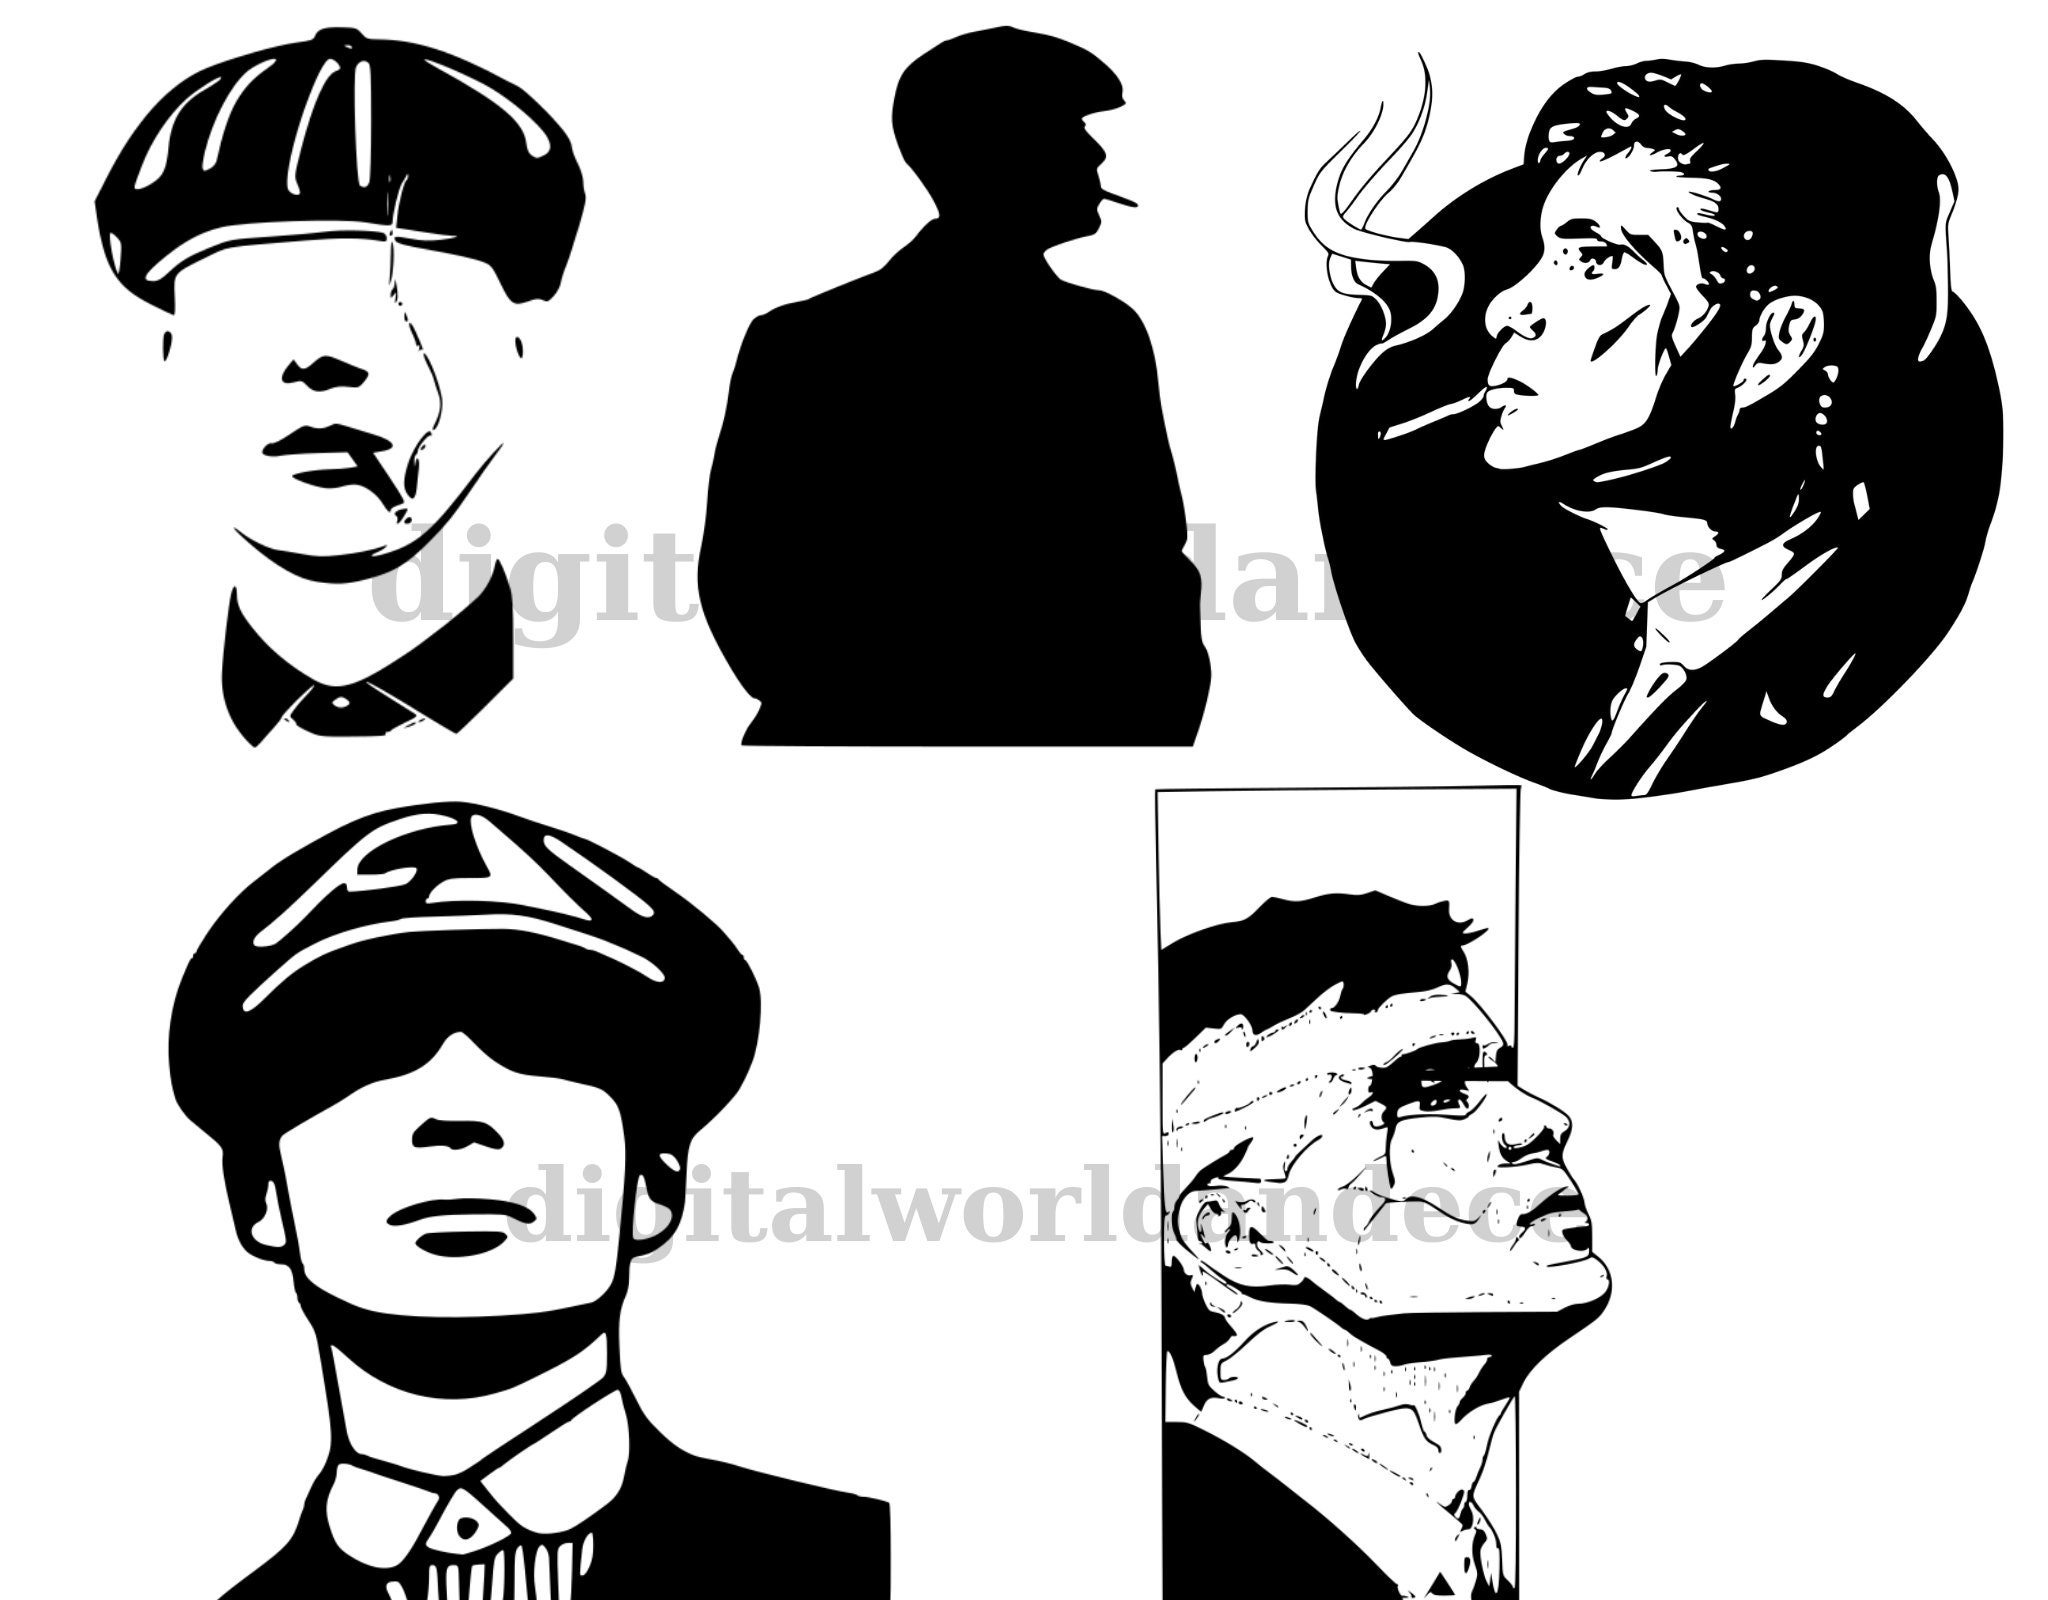 Peaky Blinders Embroidered Patch | Traditional Tattoo Art | Cillian Murphy  Merch